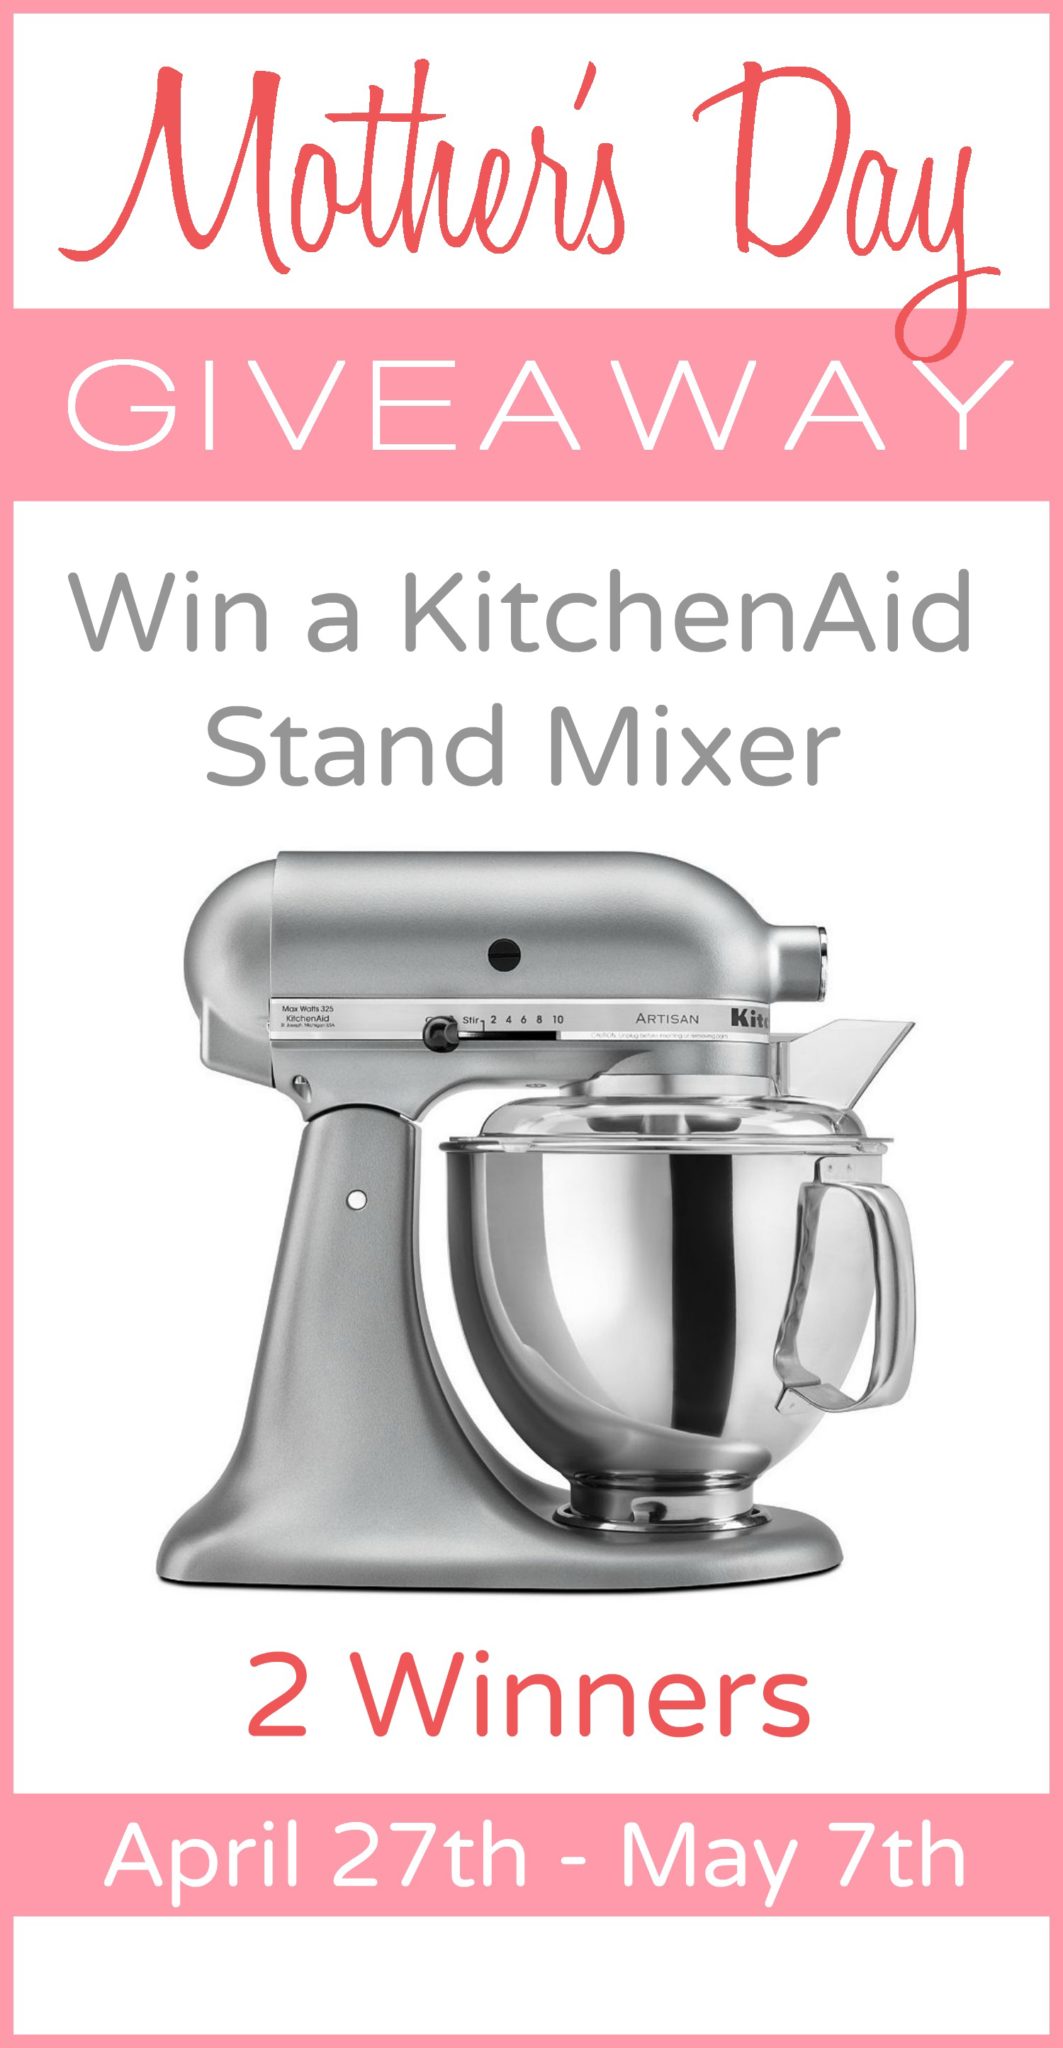 Mother's Day Giveaway - Win a KitchenAid Stand Mixer - 2 Winners